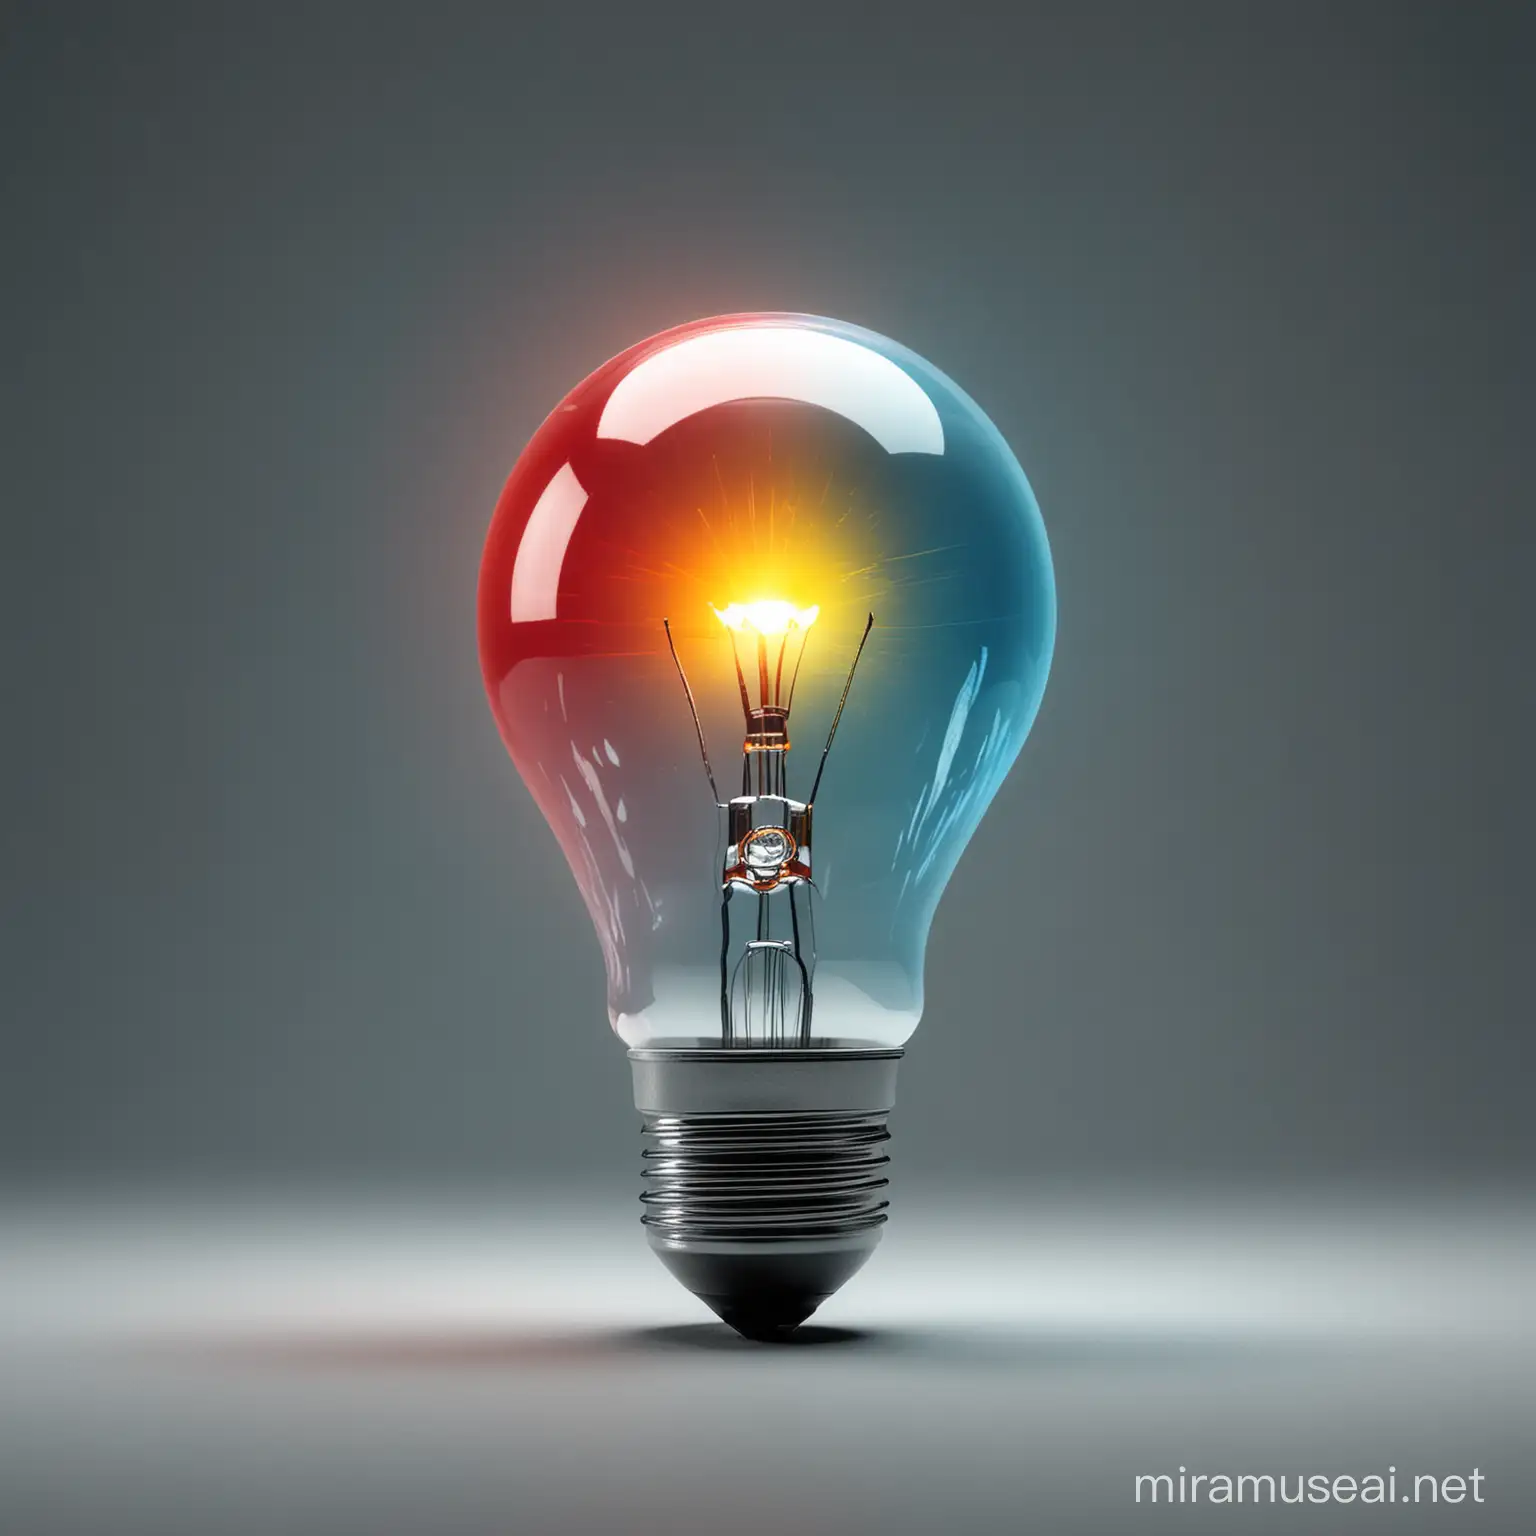 Create an image with a blinking light bulb in futuristic colors so that the background is gray and the light bulb itself is red, yellow and blue.